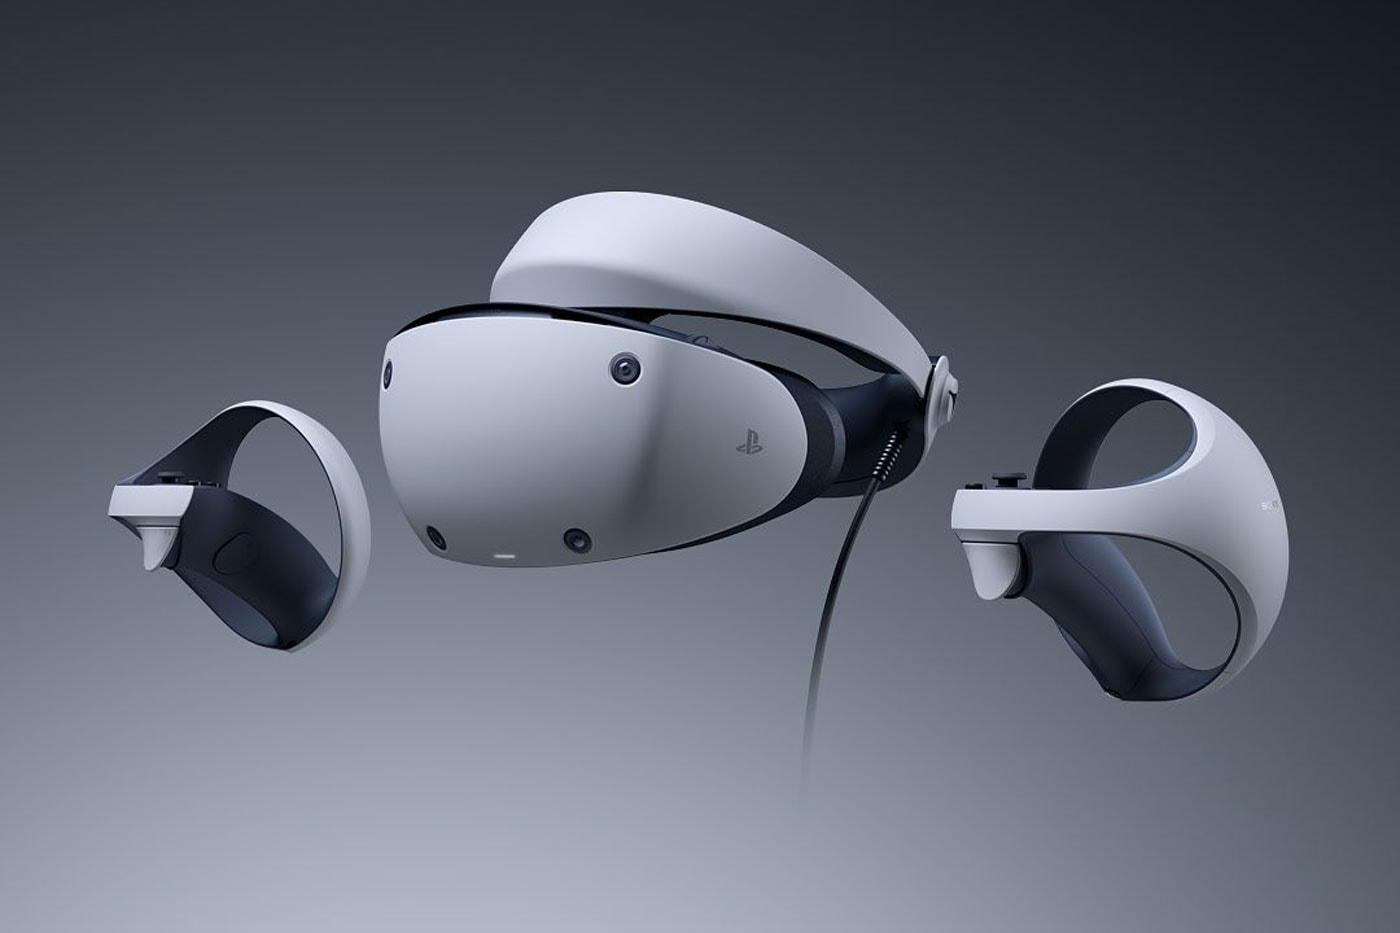 Sony's PlayStation VR2 headset is coming in early 2023 - The Verge